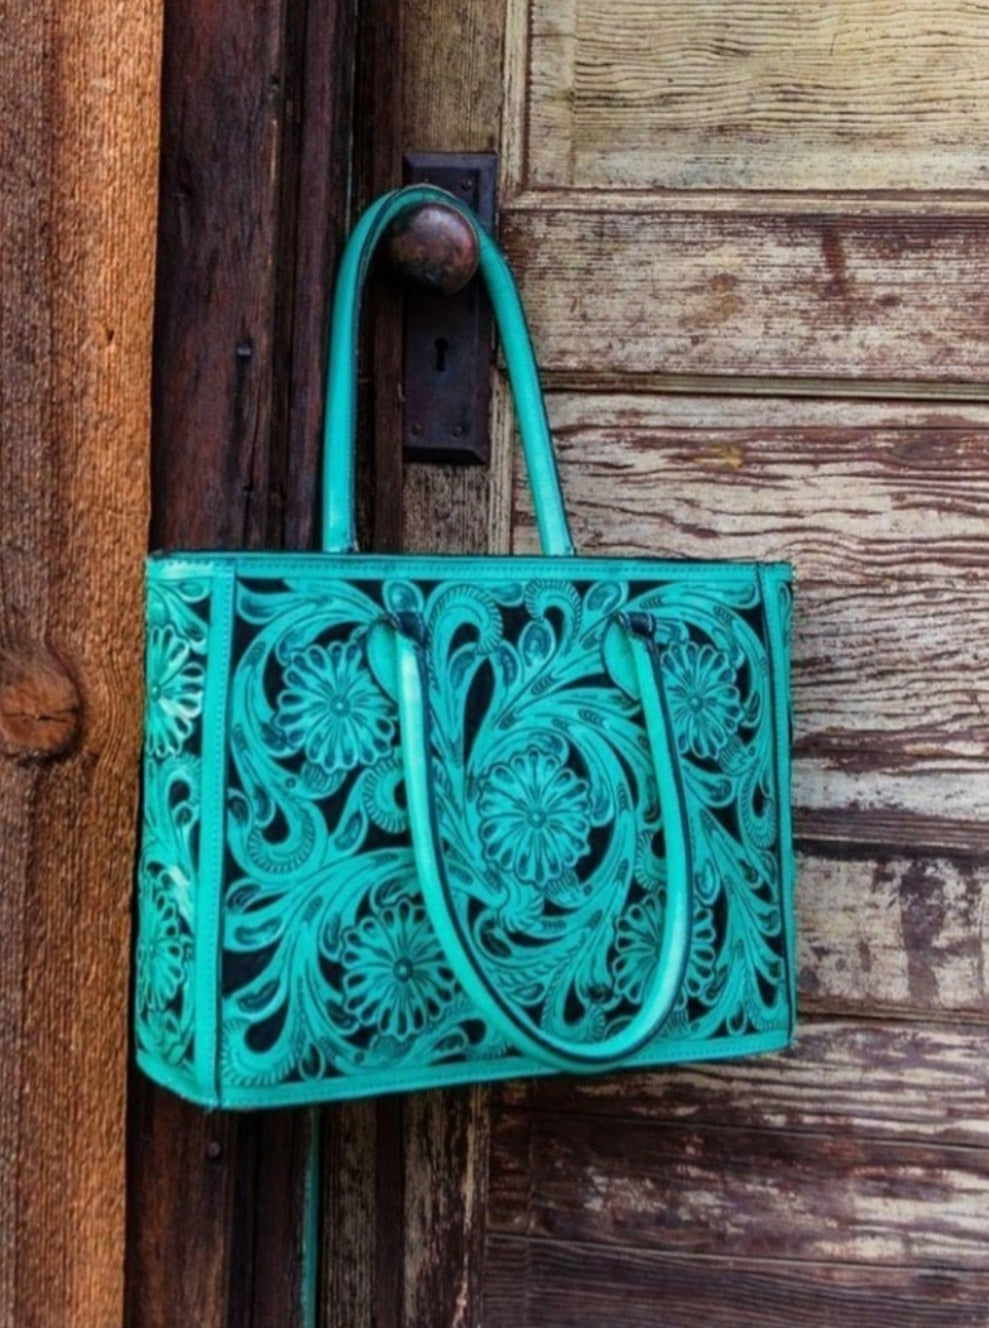 Tooled Leather Tote - Choice of Colors - bag, black, floral, handbag, leather, made in the usa, madeintheusa, MADEINUSA, Printed in USA, purse, red, tan, tooled, tooledleather, tote, turquoise, usa, usa artisan, usa artist, usa made, usaartisan, usaartist, USAMADE, western -  - Baha Ranch Western Wear